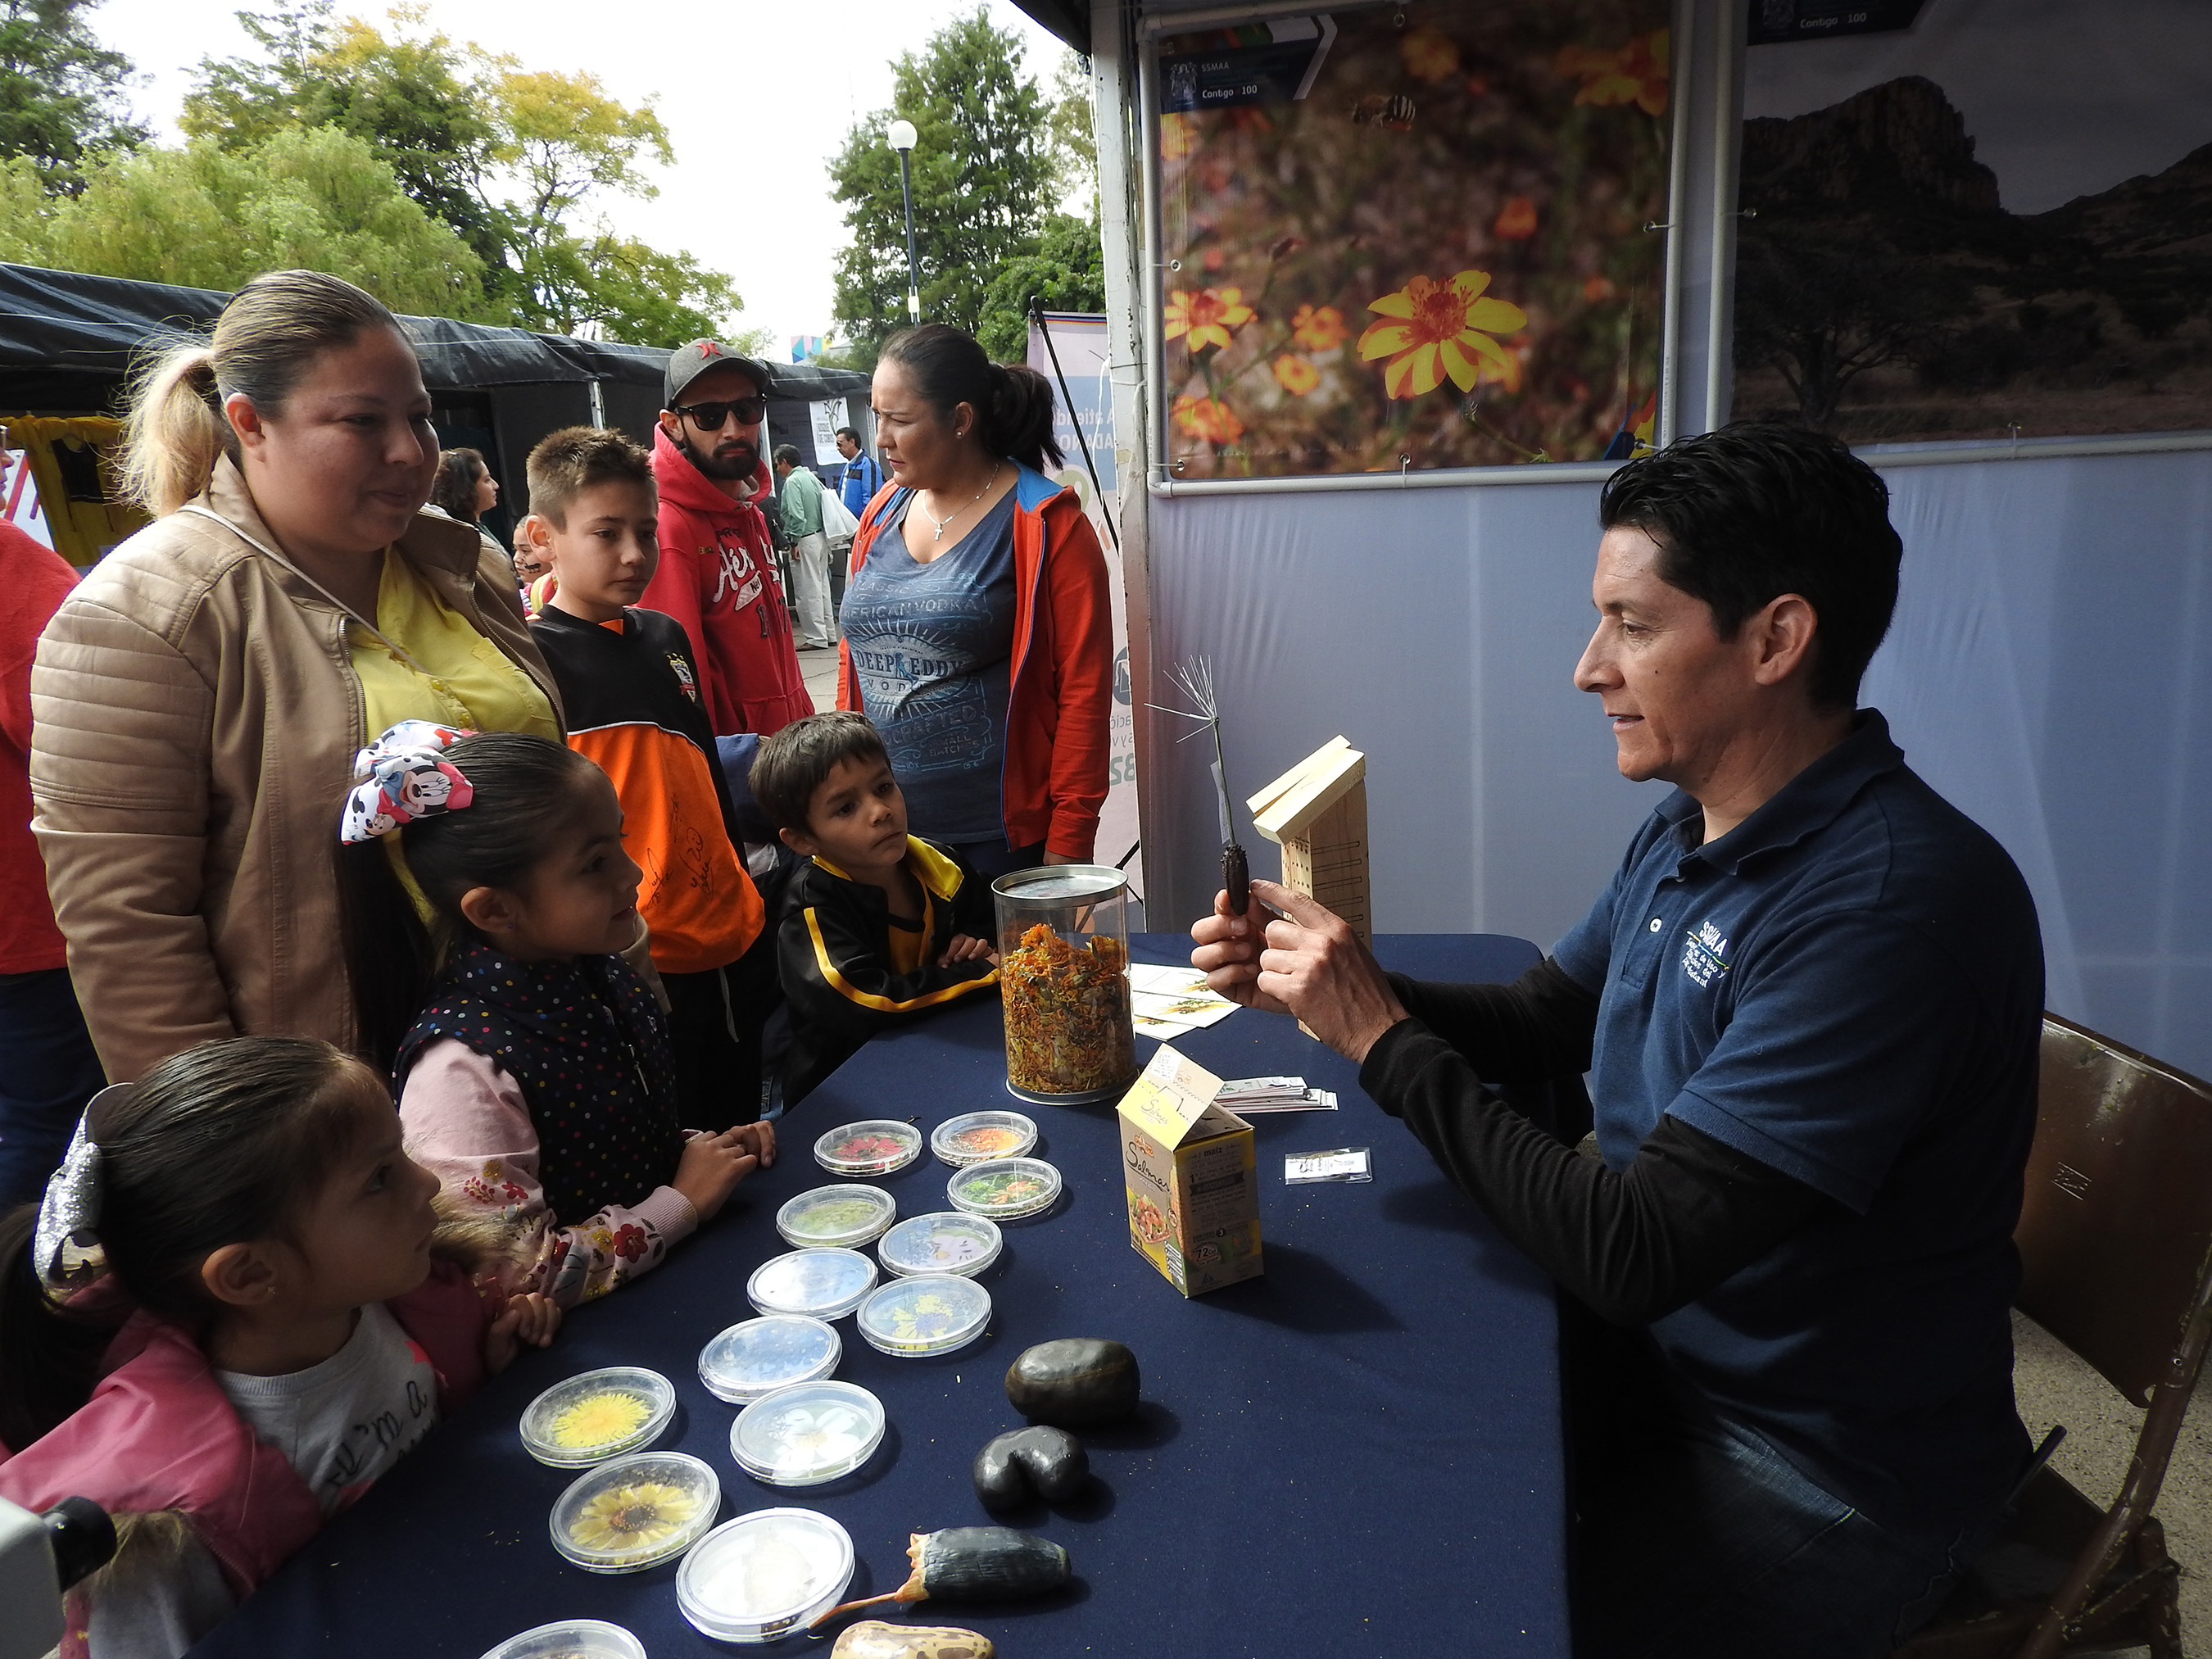  Children cluster around a tabletop display as the author talks with families about pollinators and conservation.